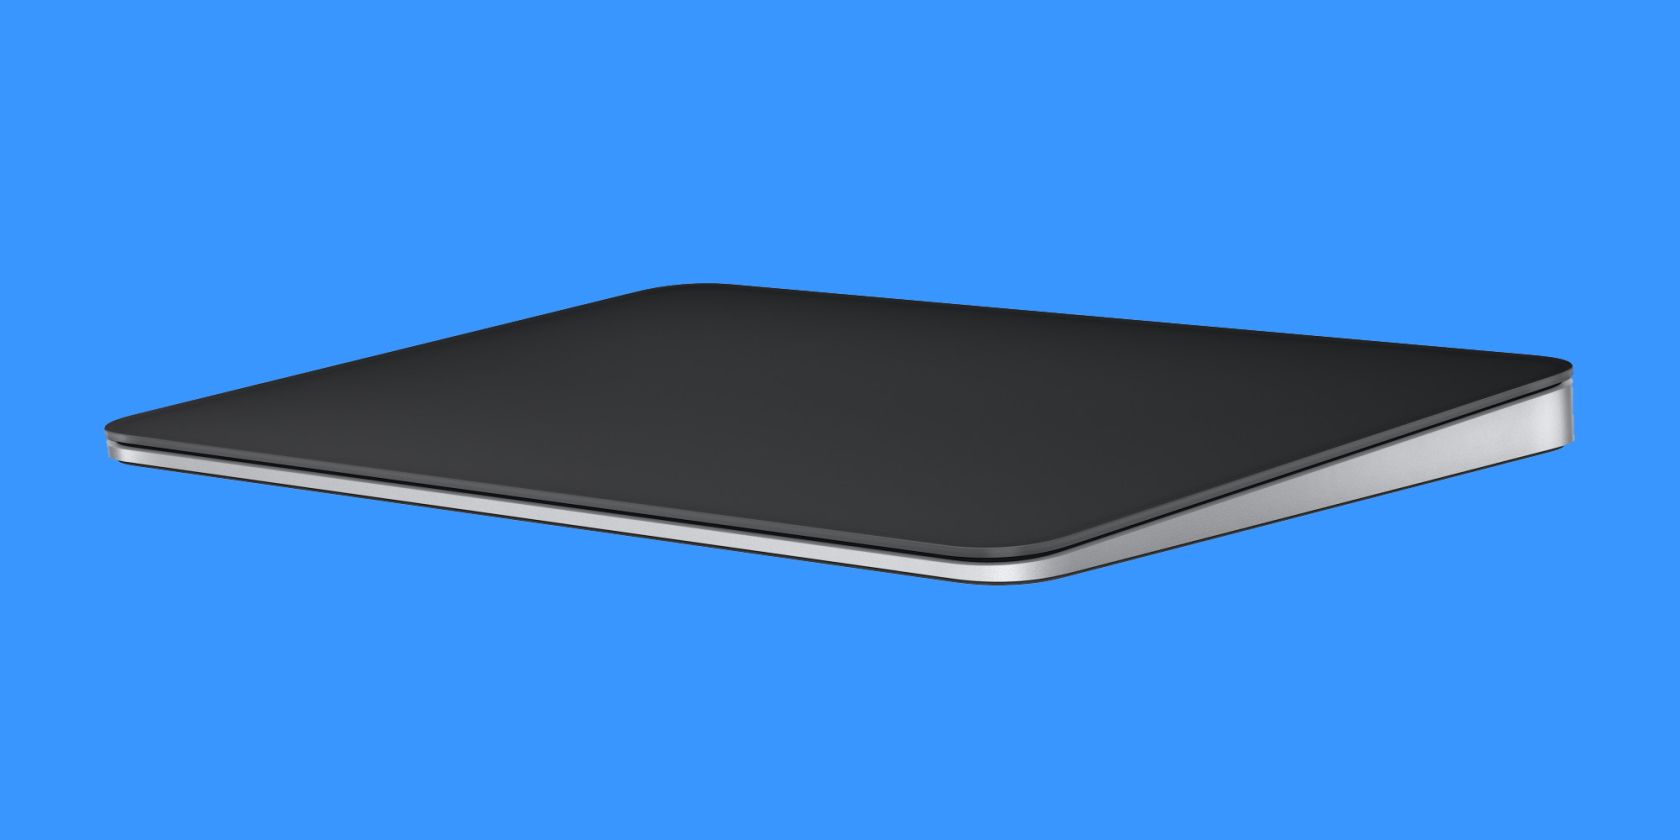 The Pros and Cons of Using Apple's Magic Trackpad